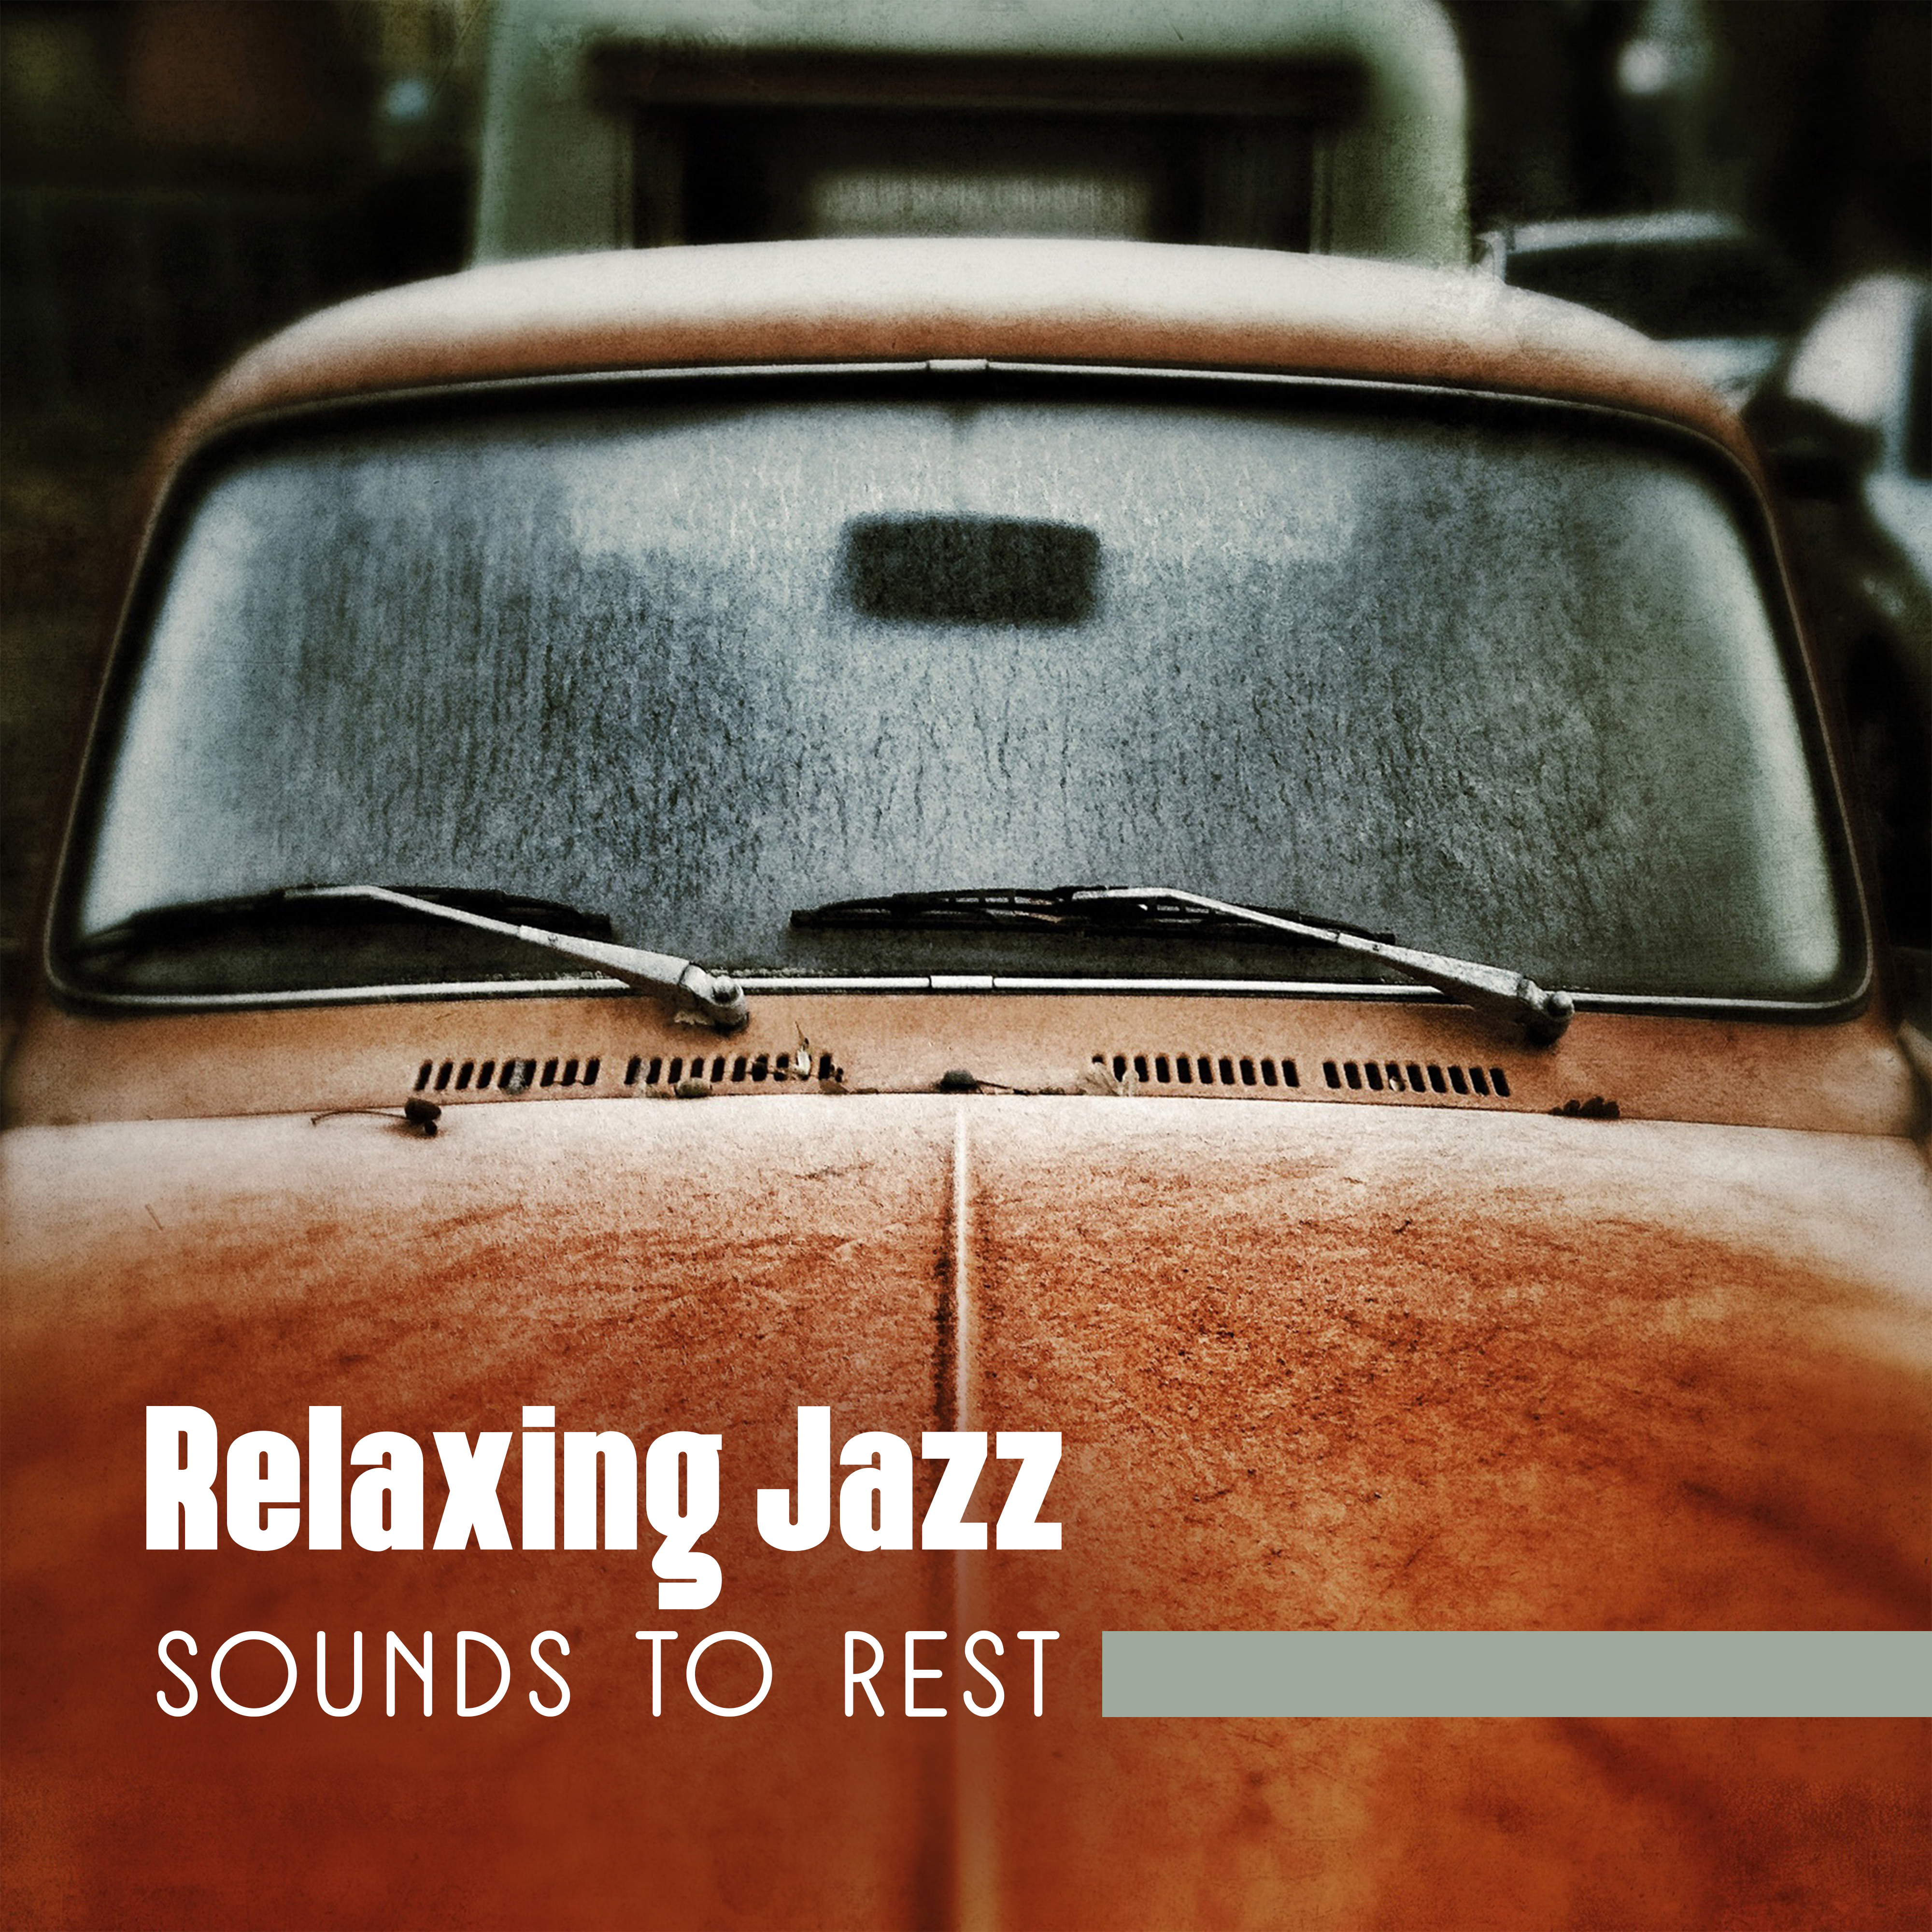 Relaxing Jazz Sounds to Rest – Calming Sounds to Relax, Jazz Music for Mind Peace, No More Stress